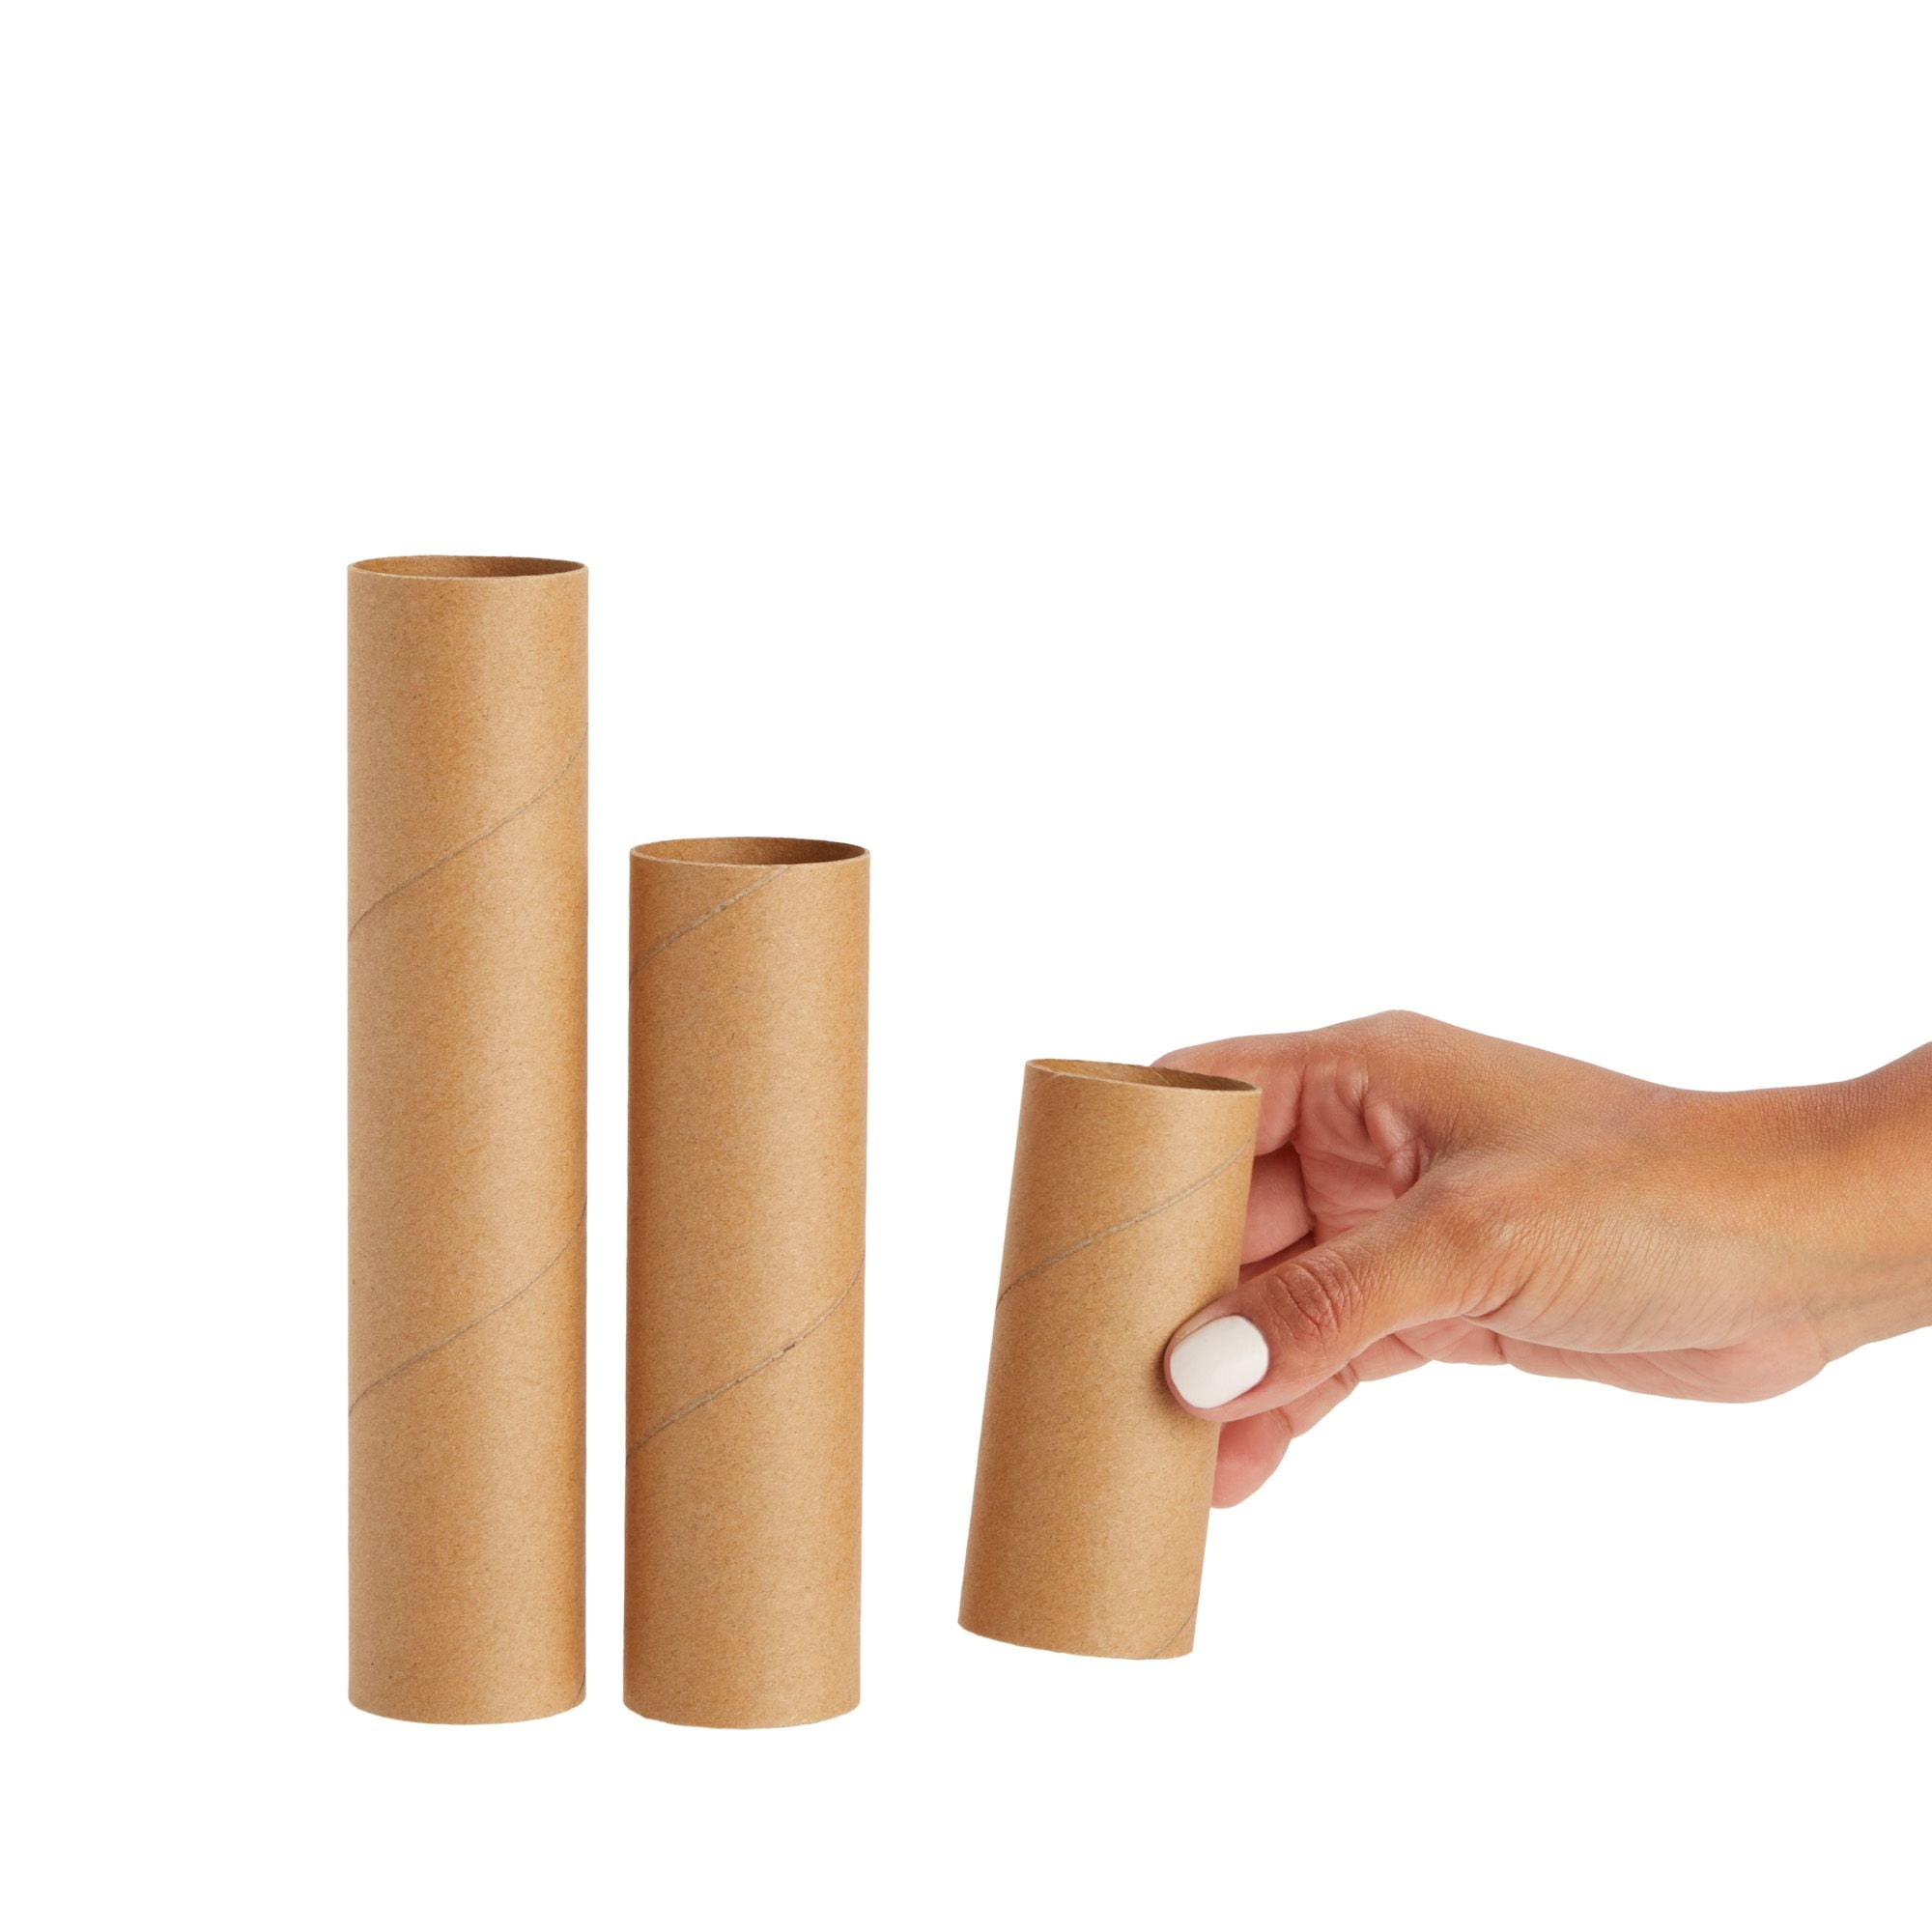 Craft Rolls Cardboard Tubes - 50 Pack Kraft Cardboard Tubes for DIY, Classrooms, Dioramas, Brown, 1.7 x 3.95 Inches